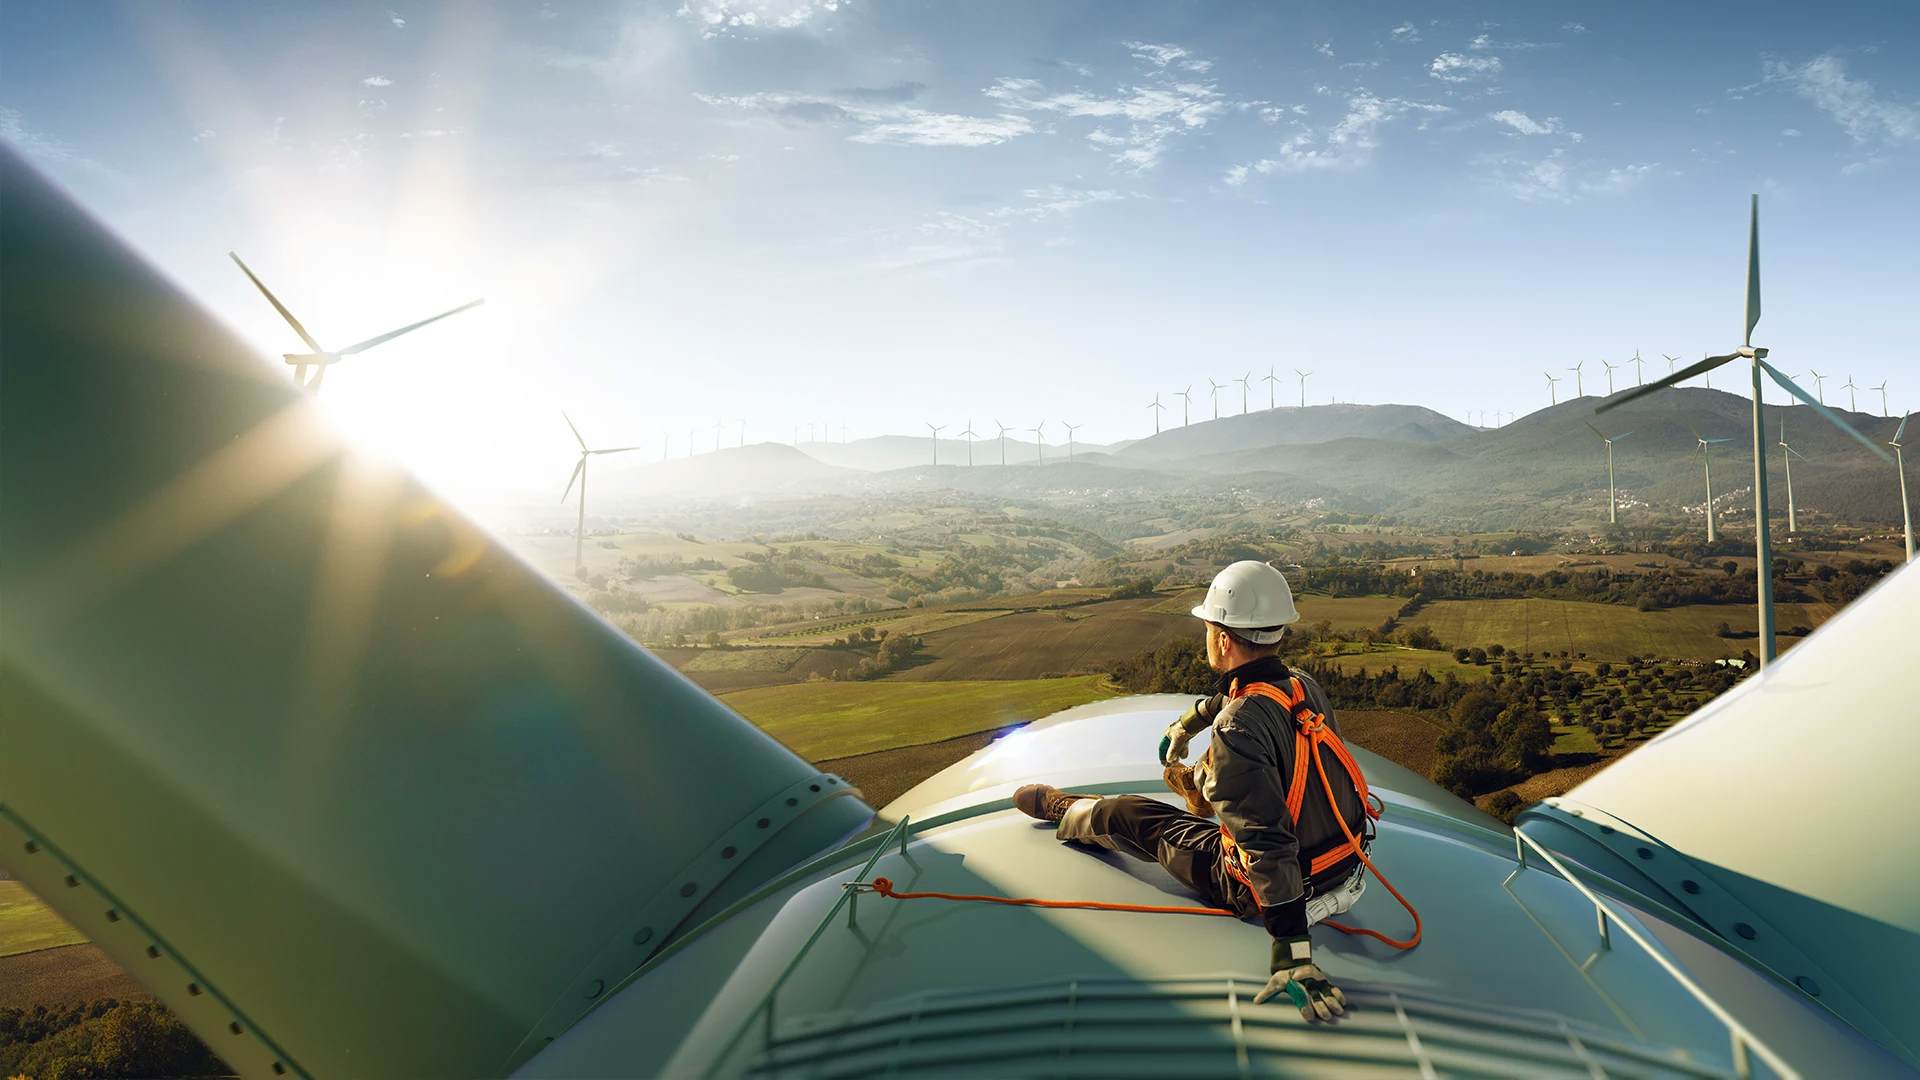 Technician sitting on a wind turbine with a scenic view of wind farm and hills.